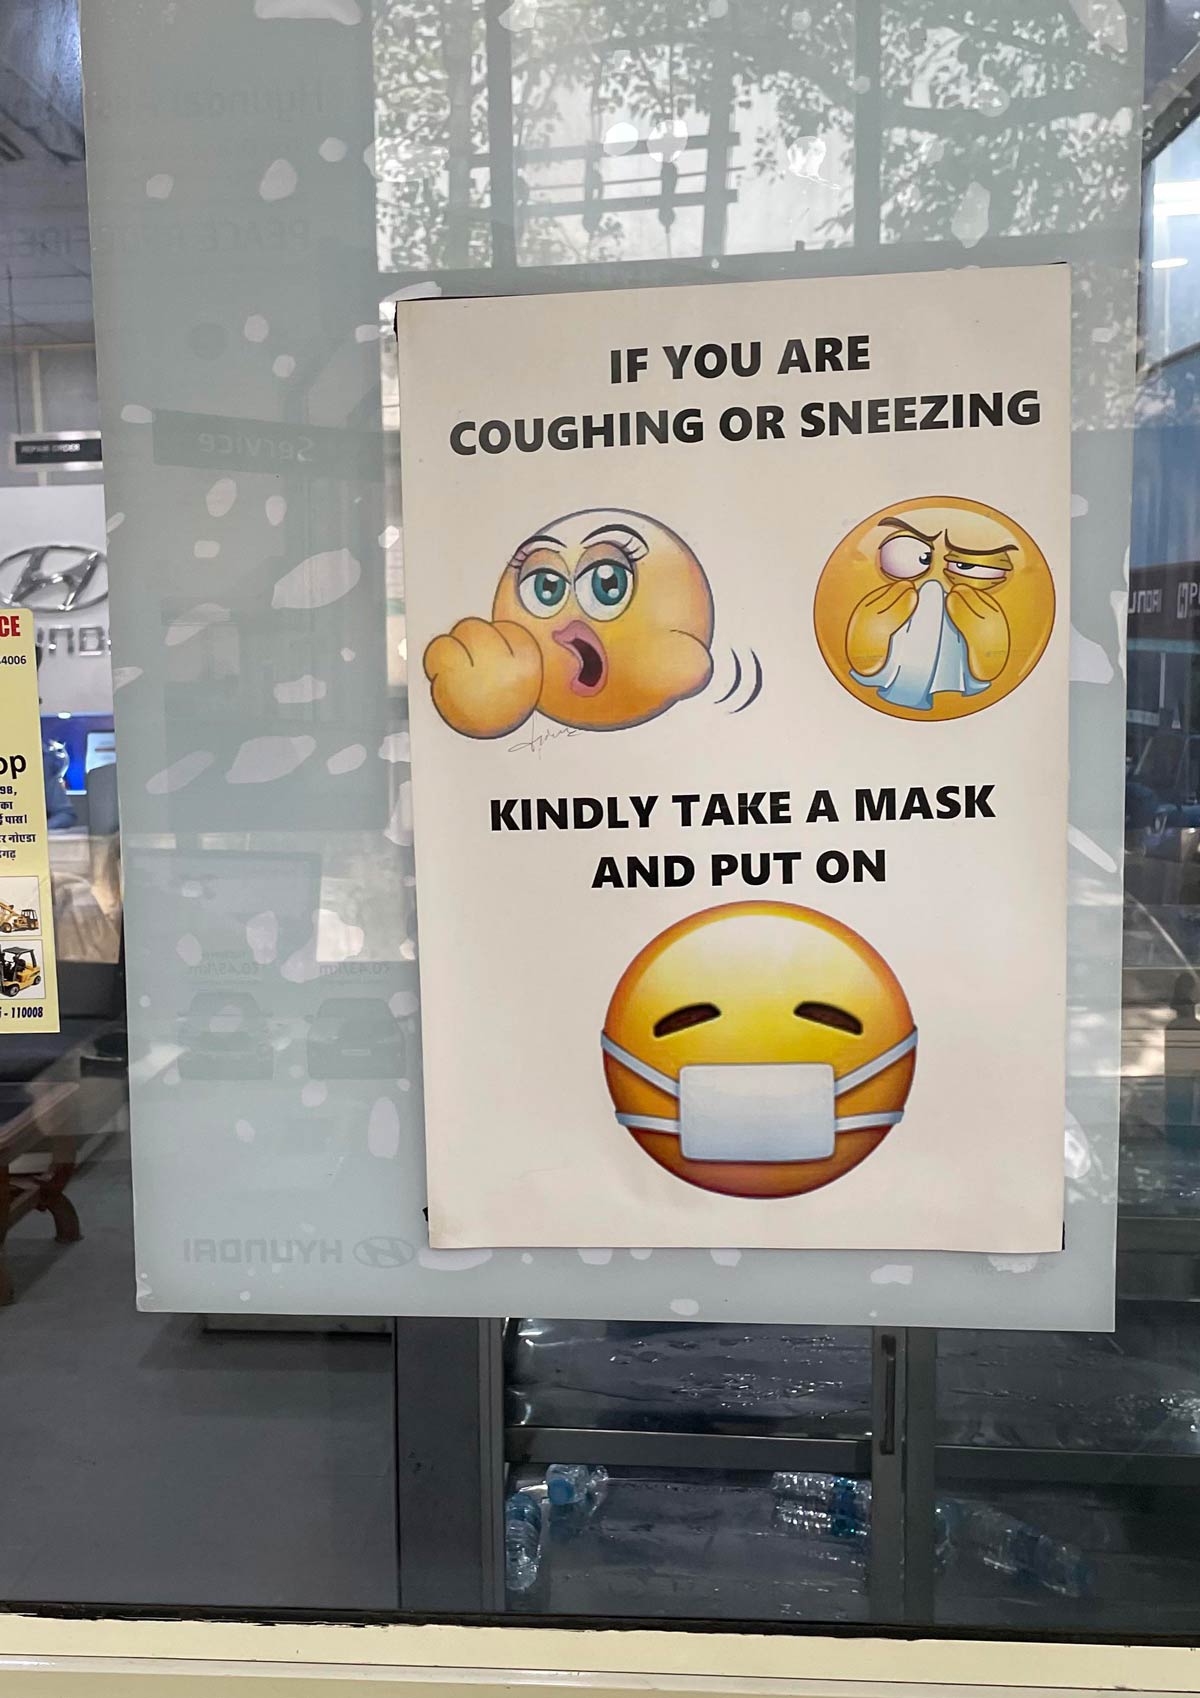 I think they downloaded the wrong "cough" emoji